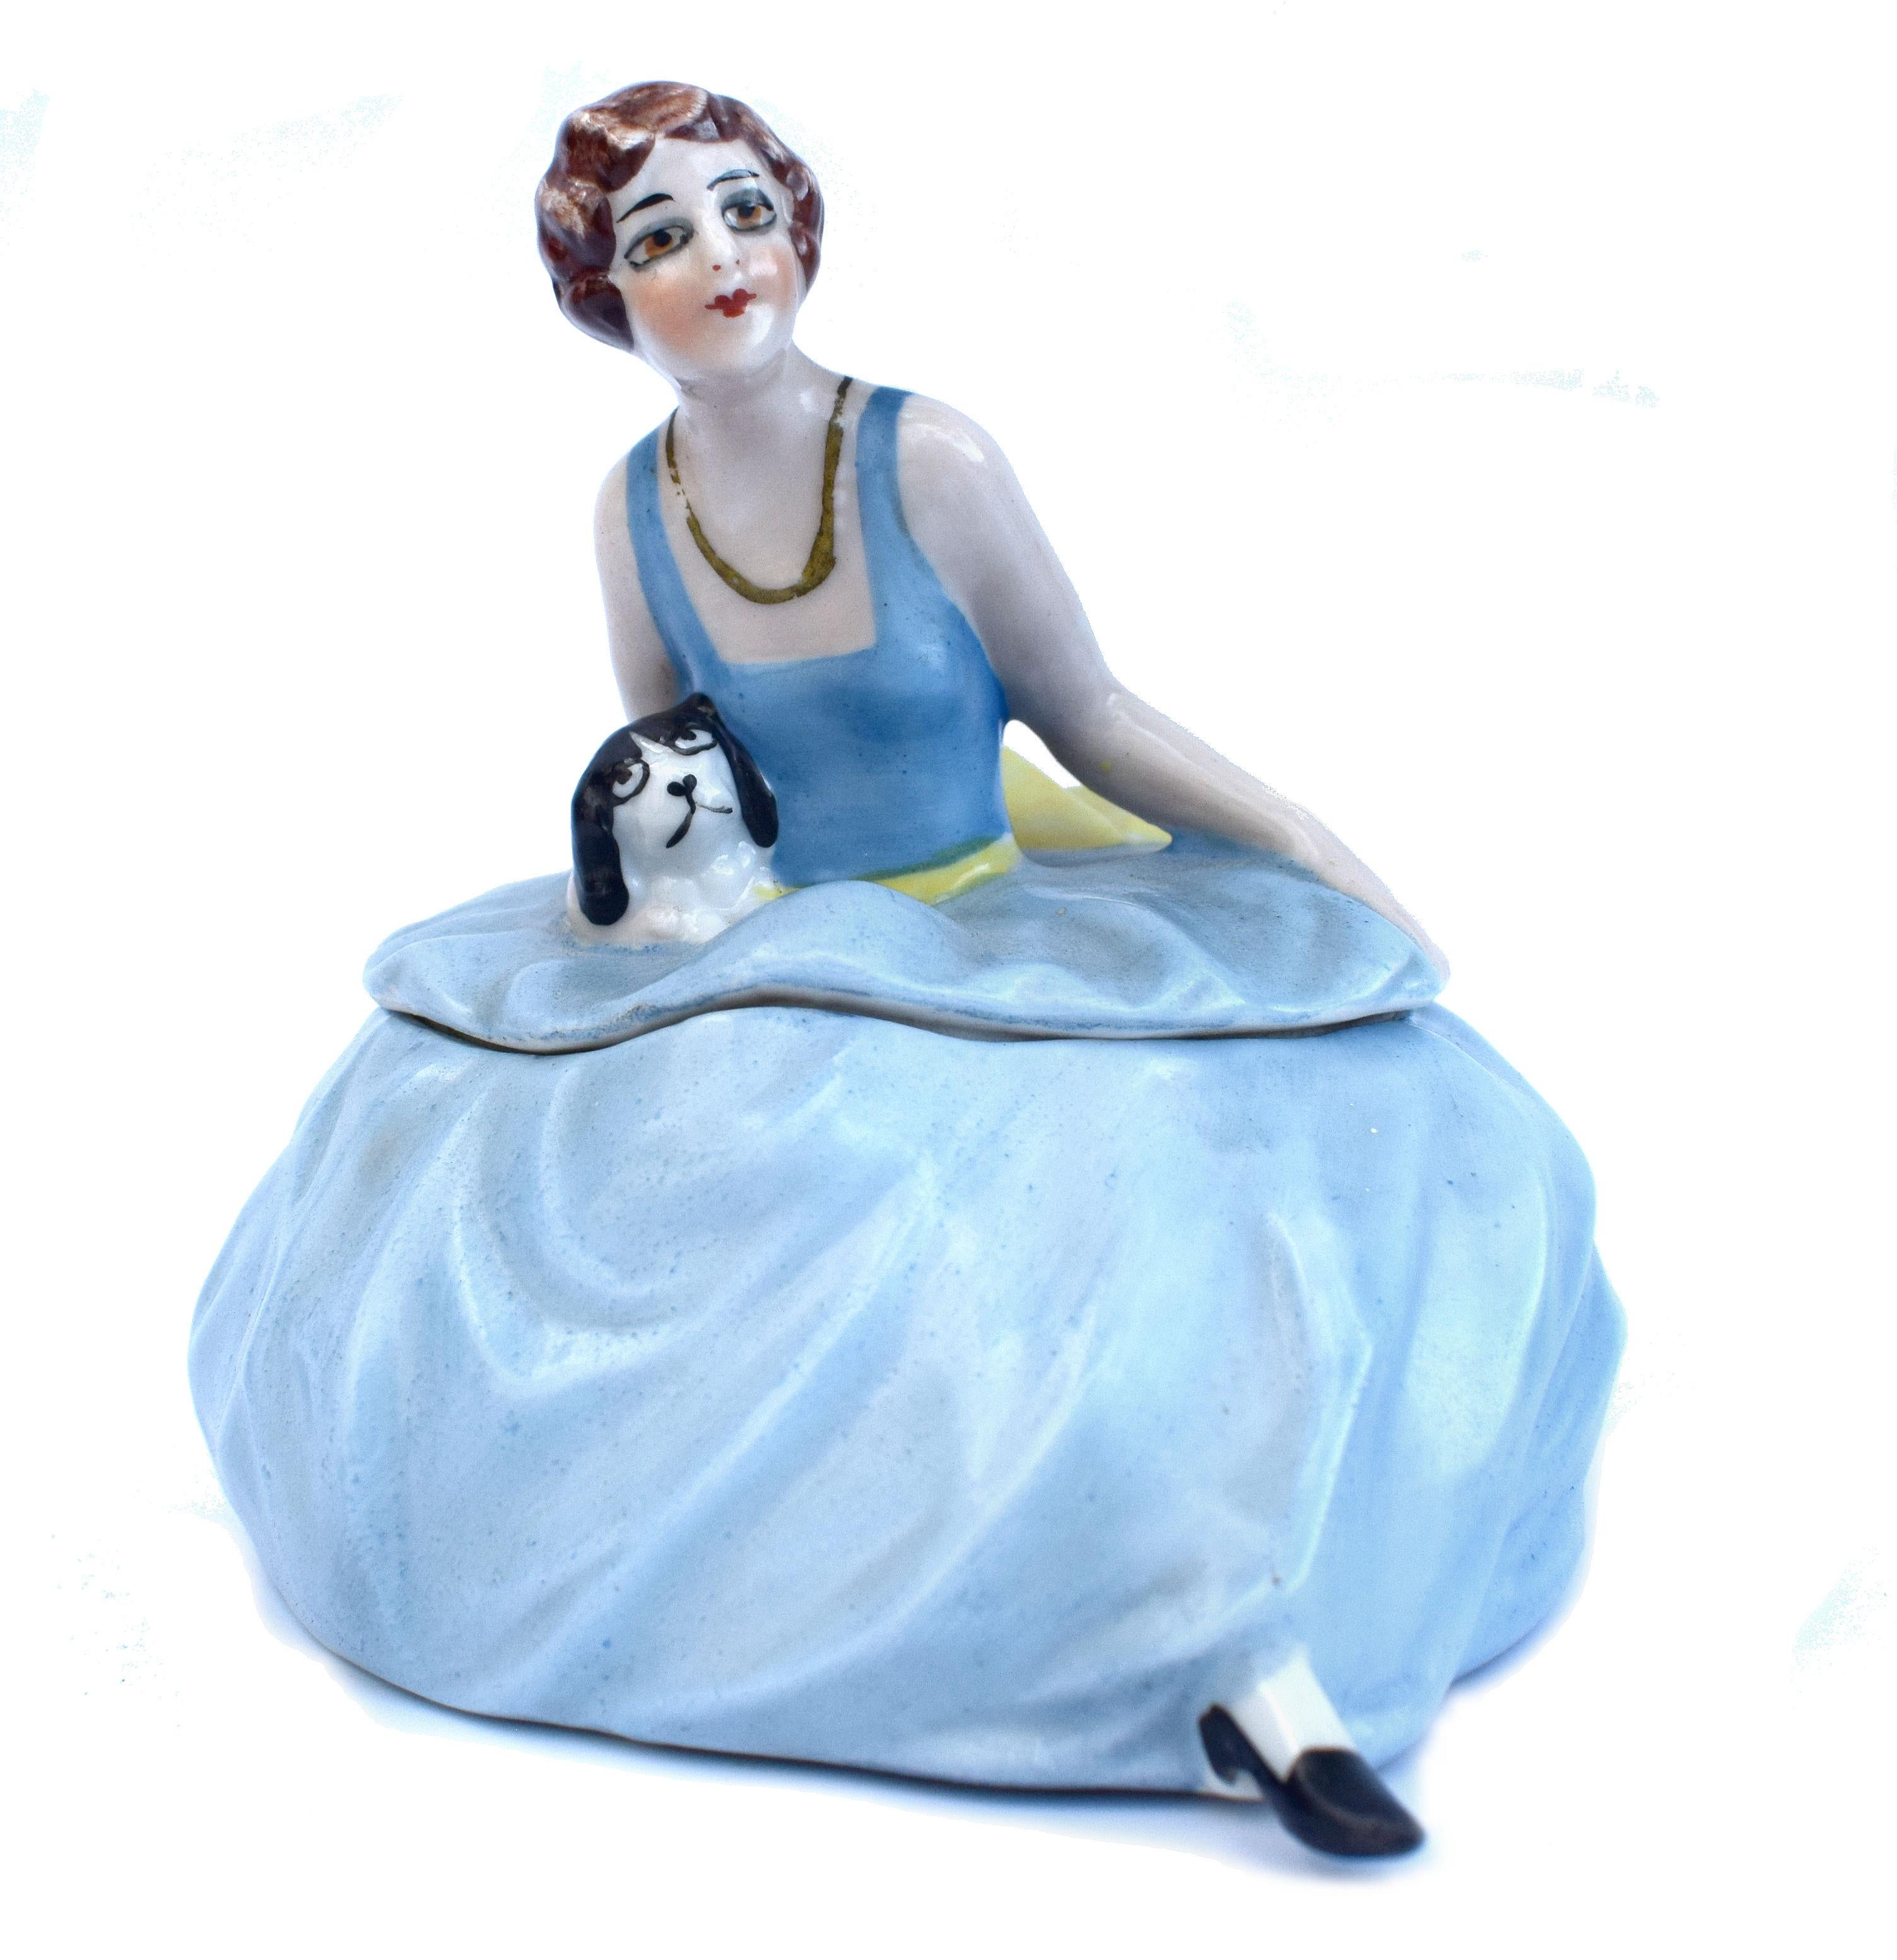 Dating to the 1930s this very attractive and rare Art Deco trinket box is made by Fasold & Stauch more commonly known for making half dolls and is a German company. Rare and in excellent condition, I couldn't find any flaws to note, she's free from